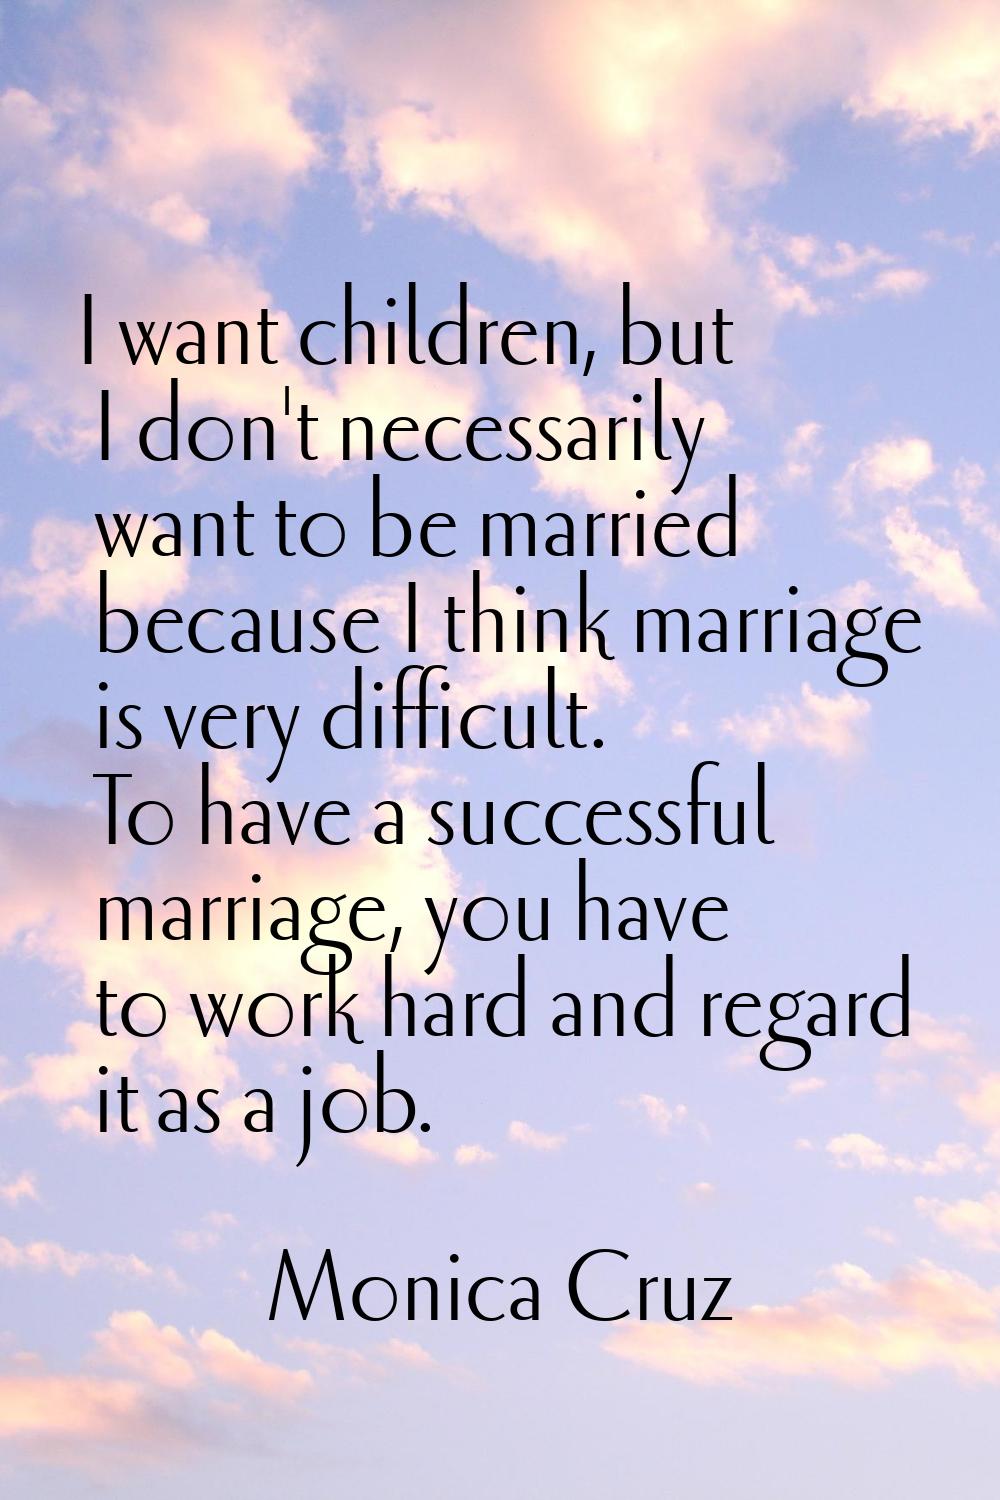 I want children, but I don't necessarily want to be married because I think marriage is very diffic